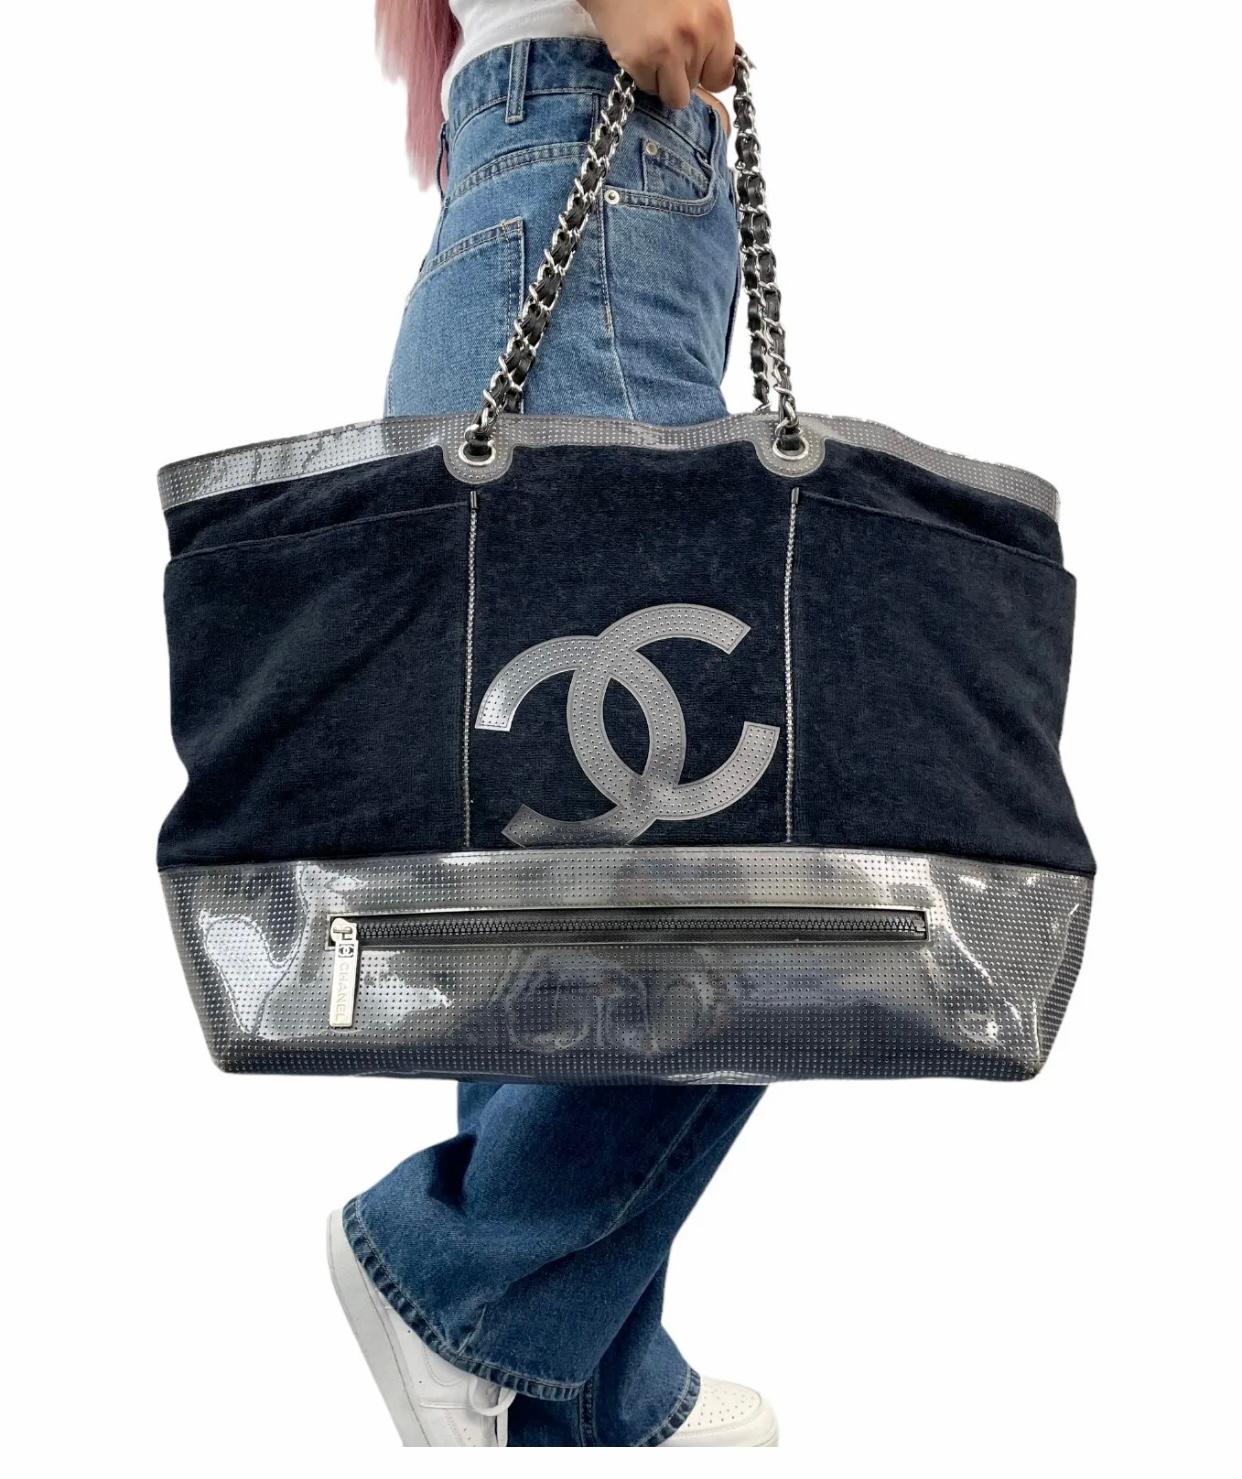 Vintage Rare Chanel Plush Terry Cloth Maxi Weekender Travel Beach Shopper Tote For Sale 9